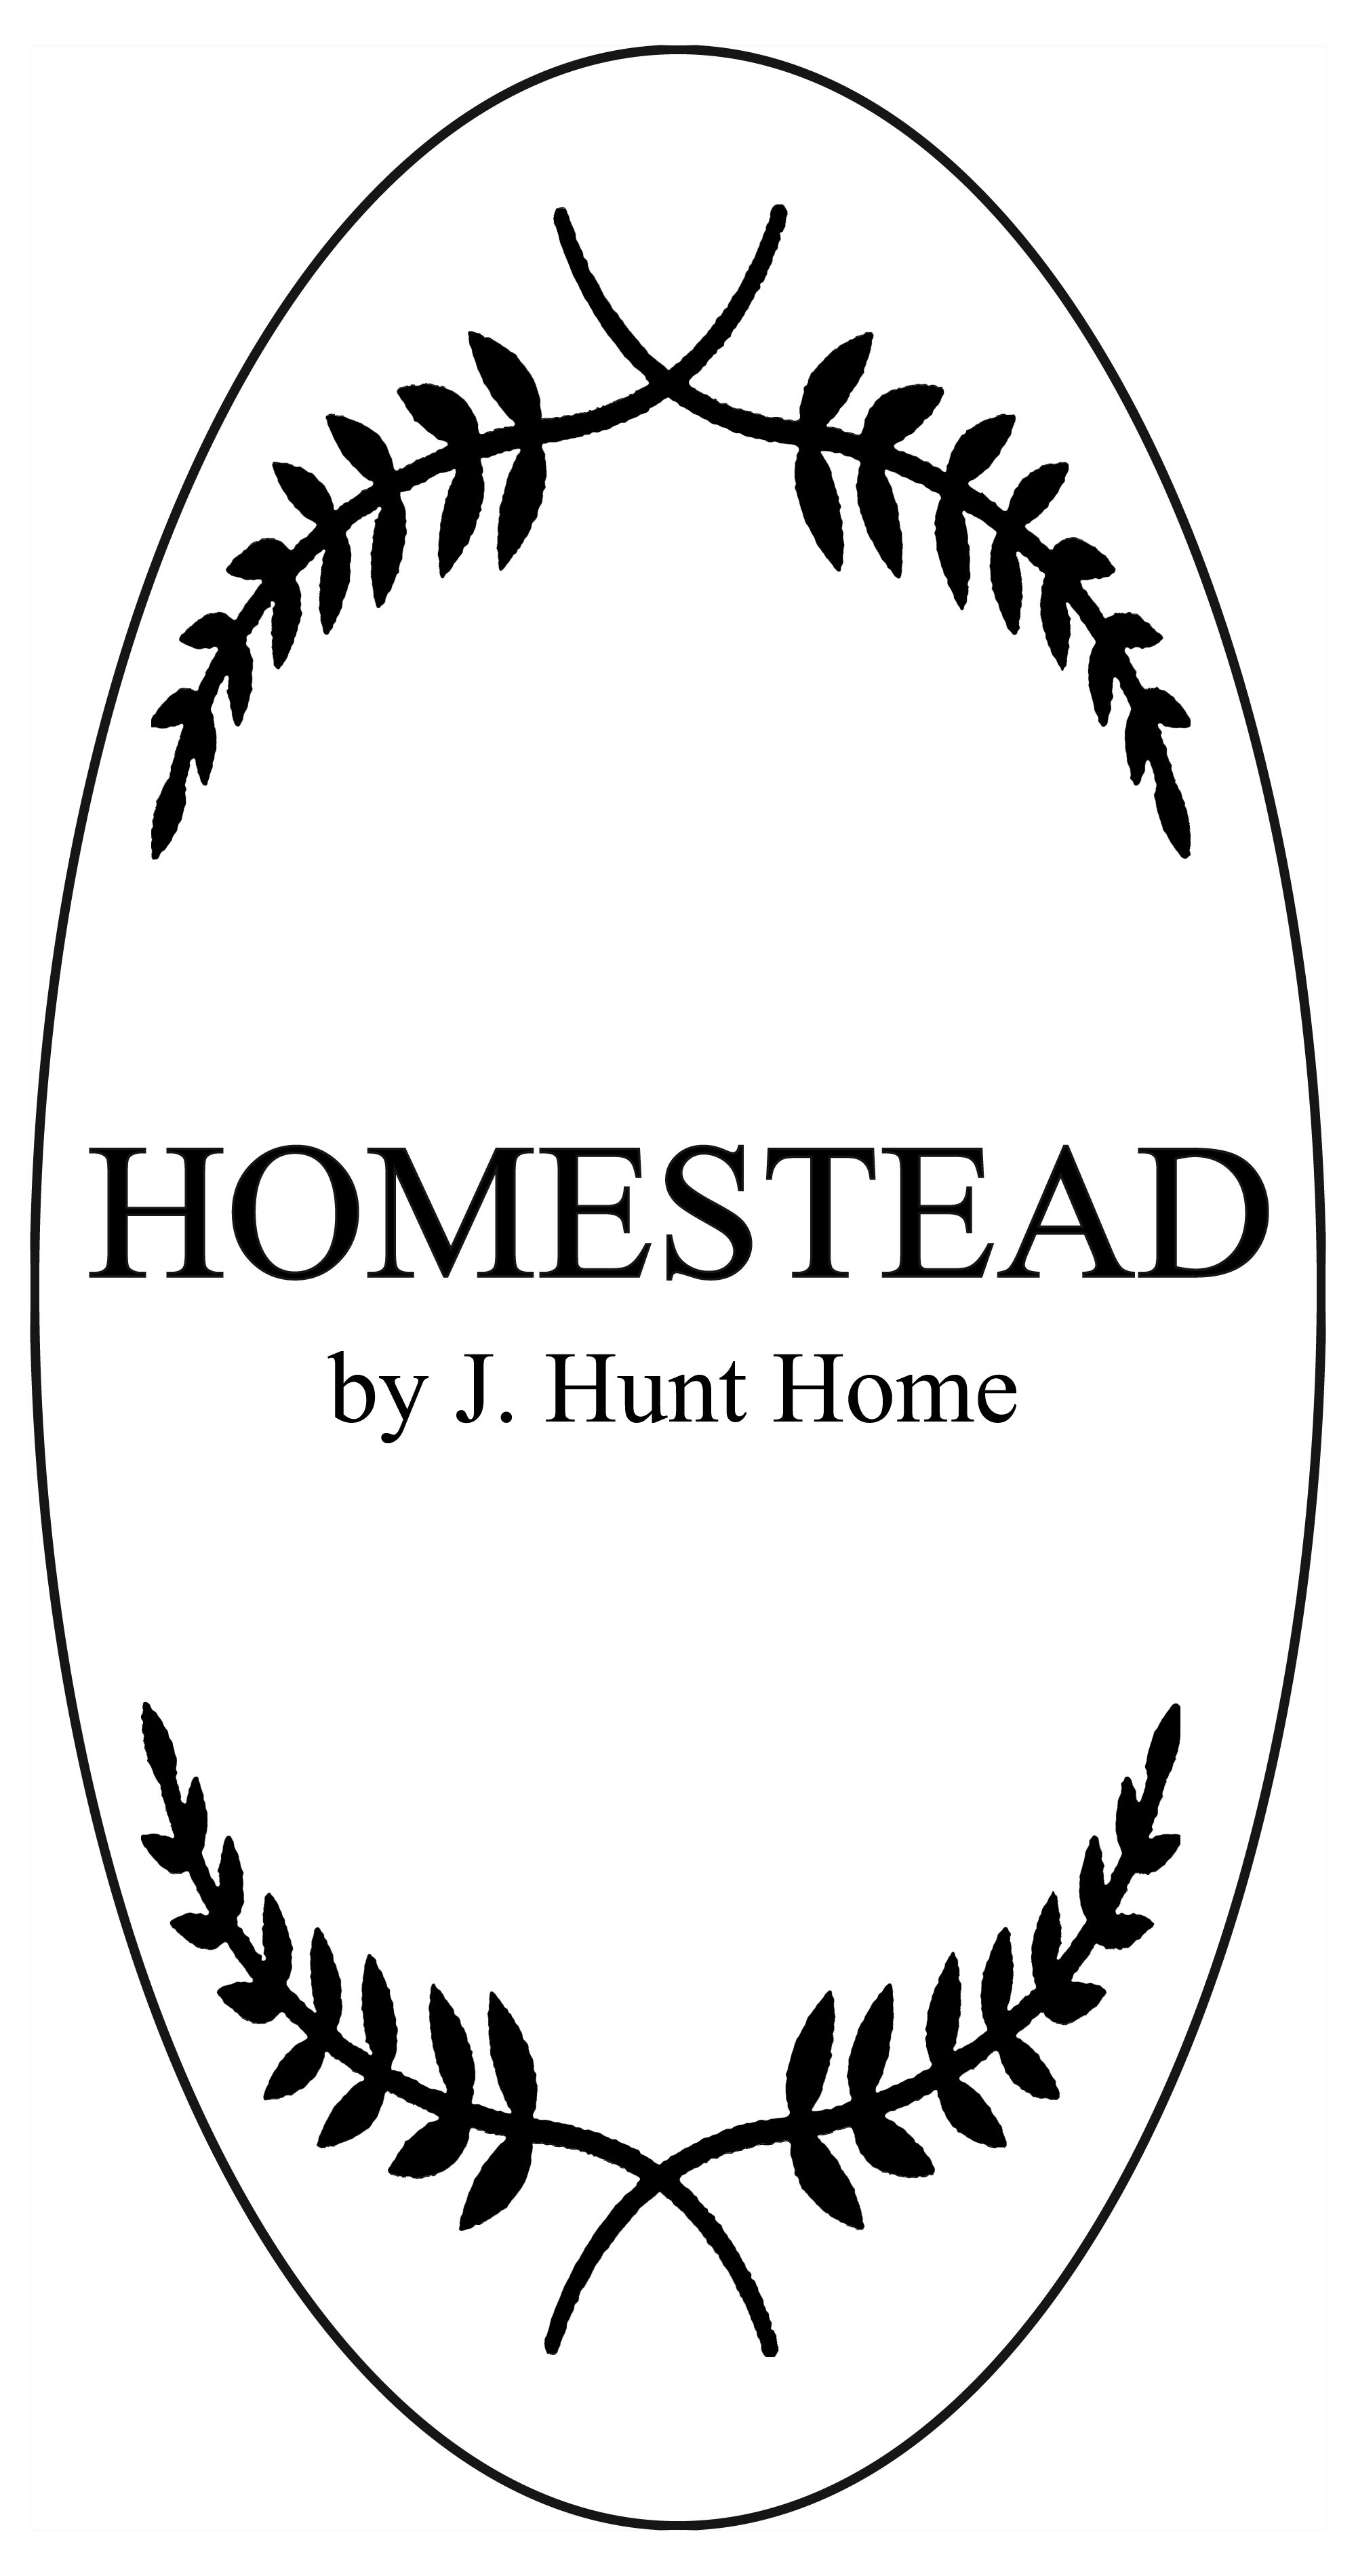  HOMESTEAD BY J. HUNT HOME